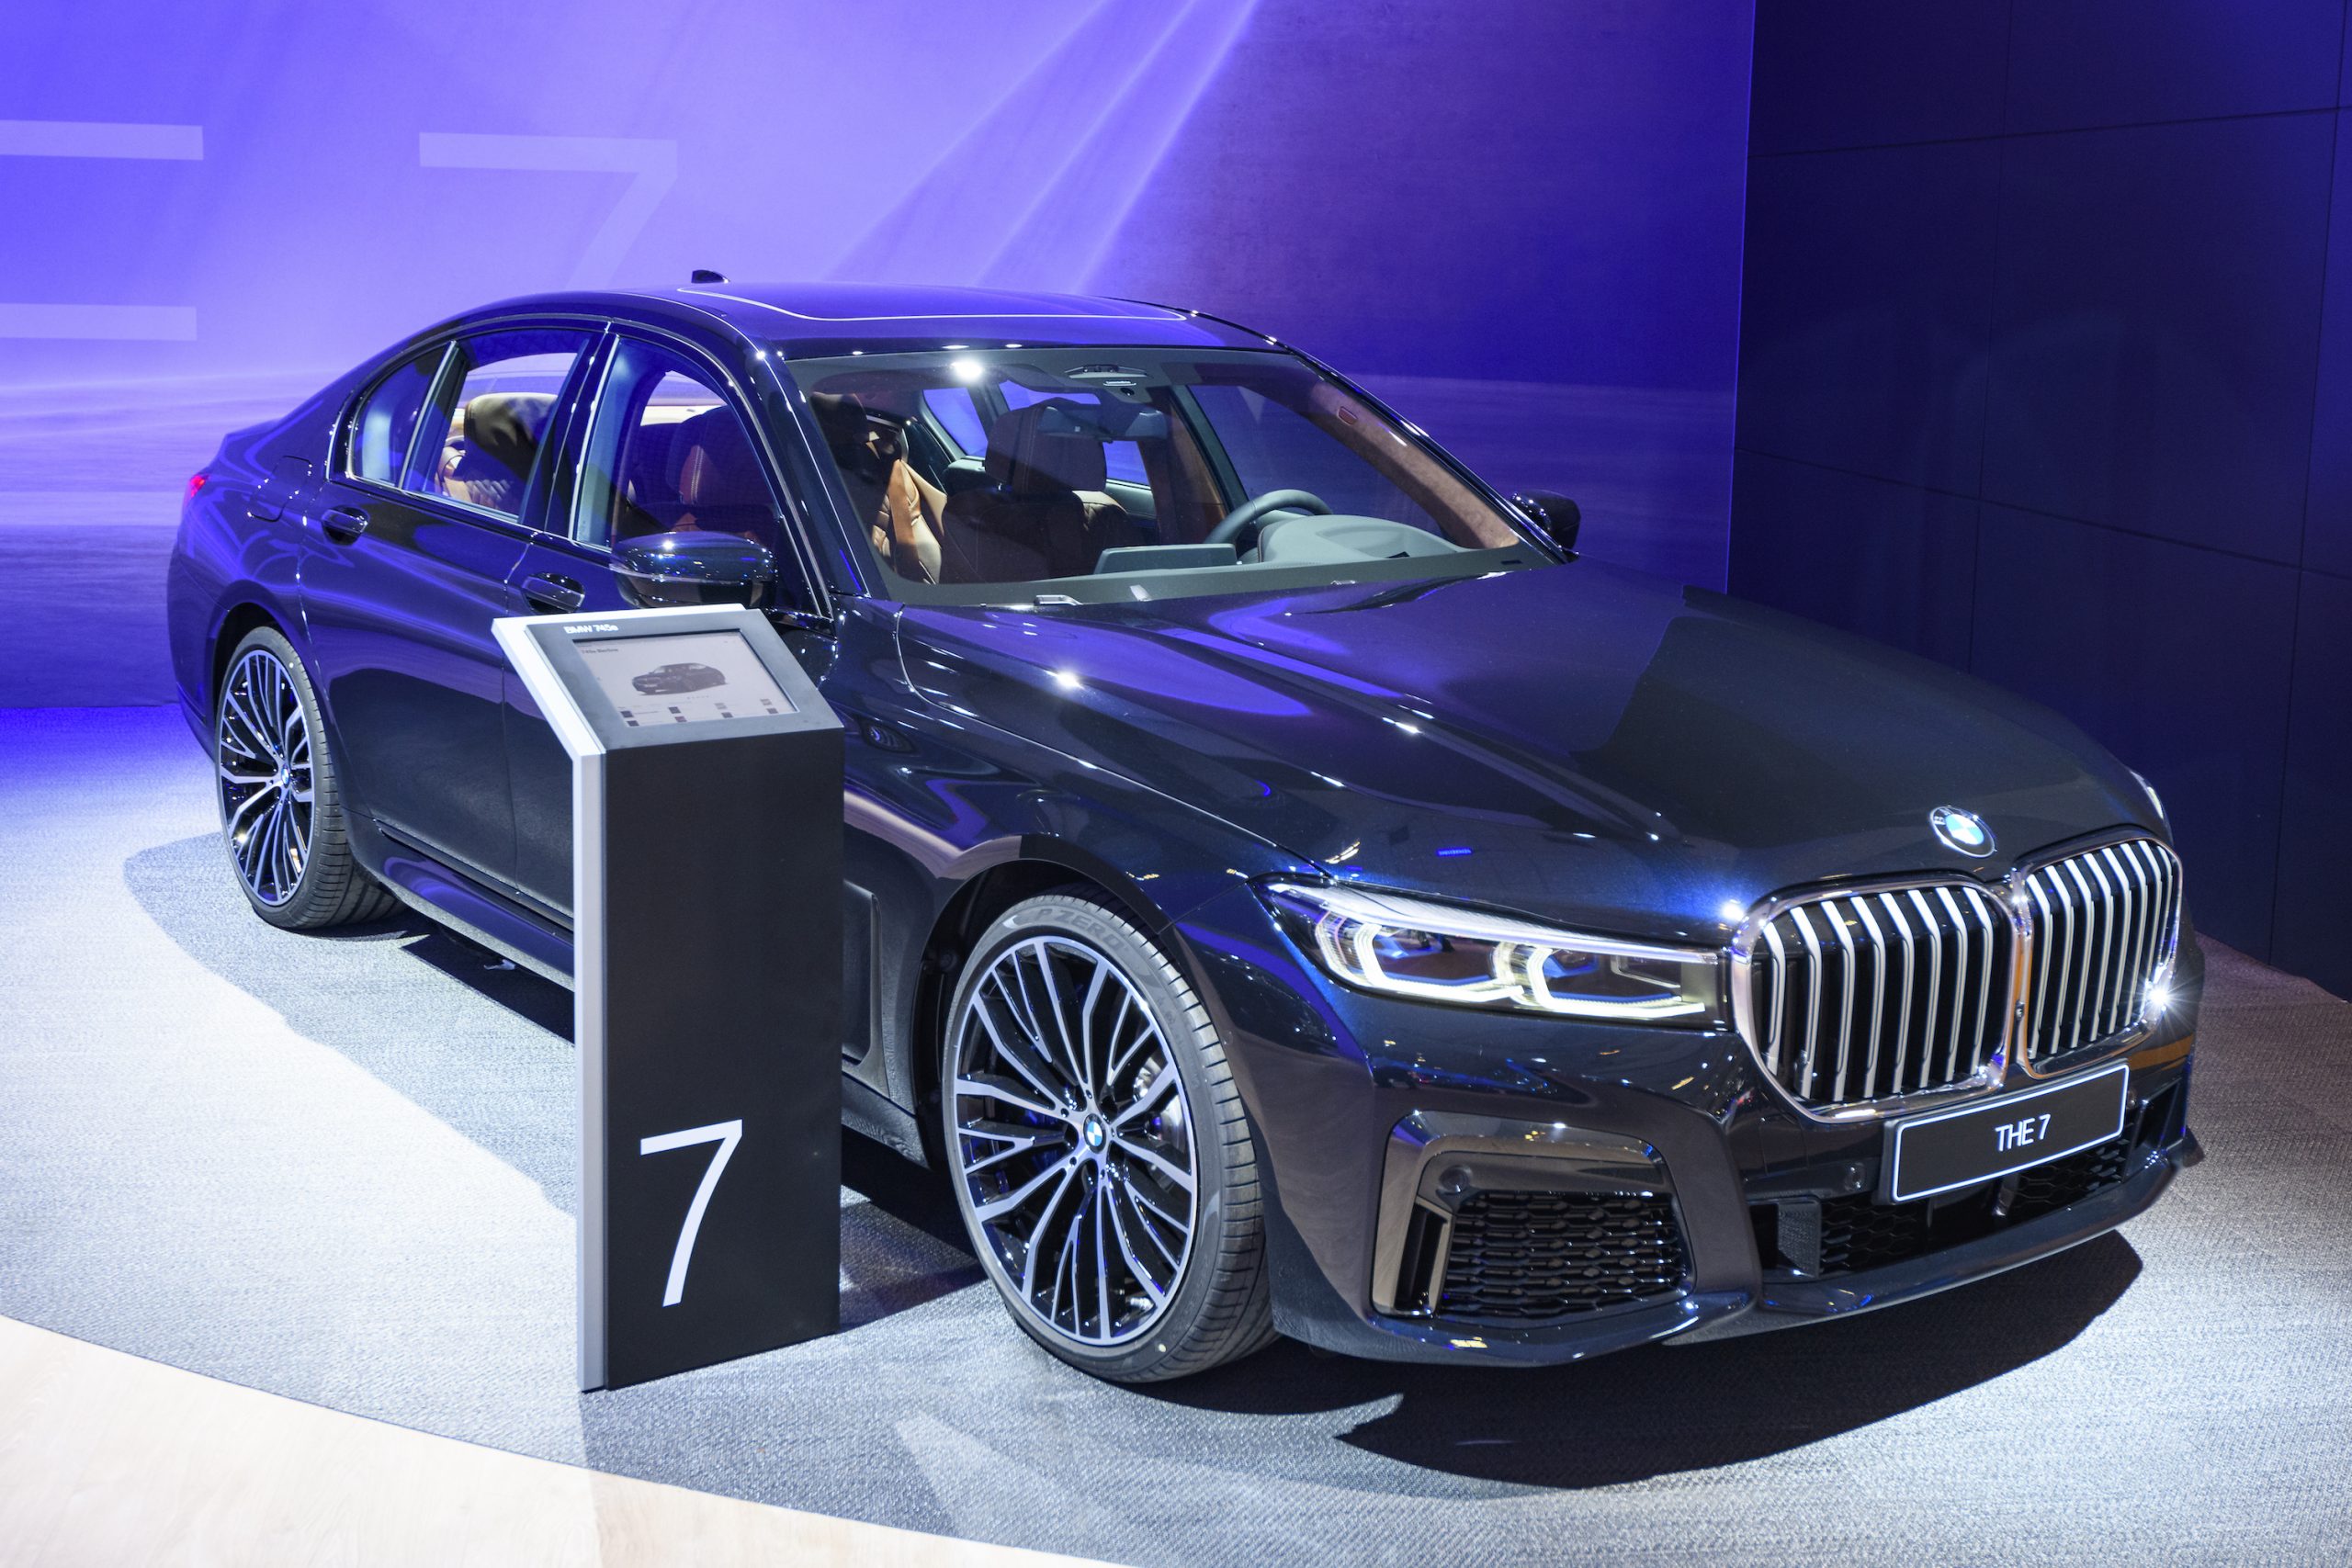 Black BMW 7 Series 745e plug-in hybrid luxury limousine on display at Brussels Expo